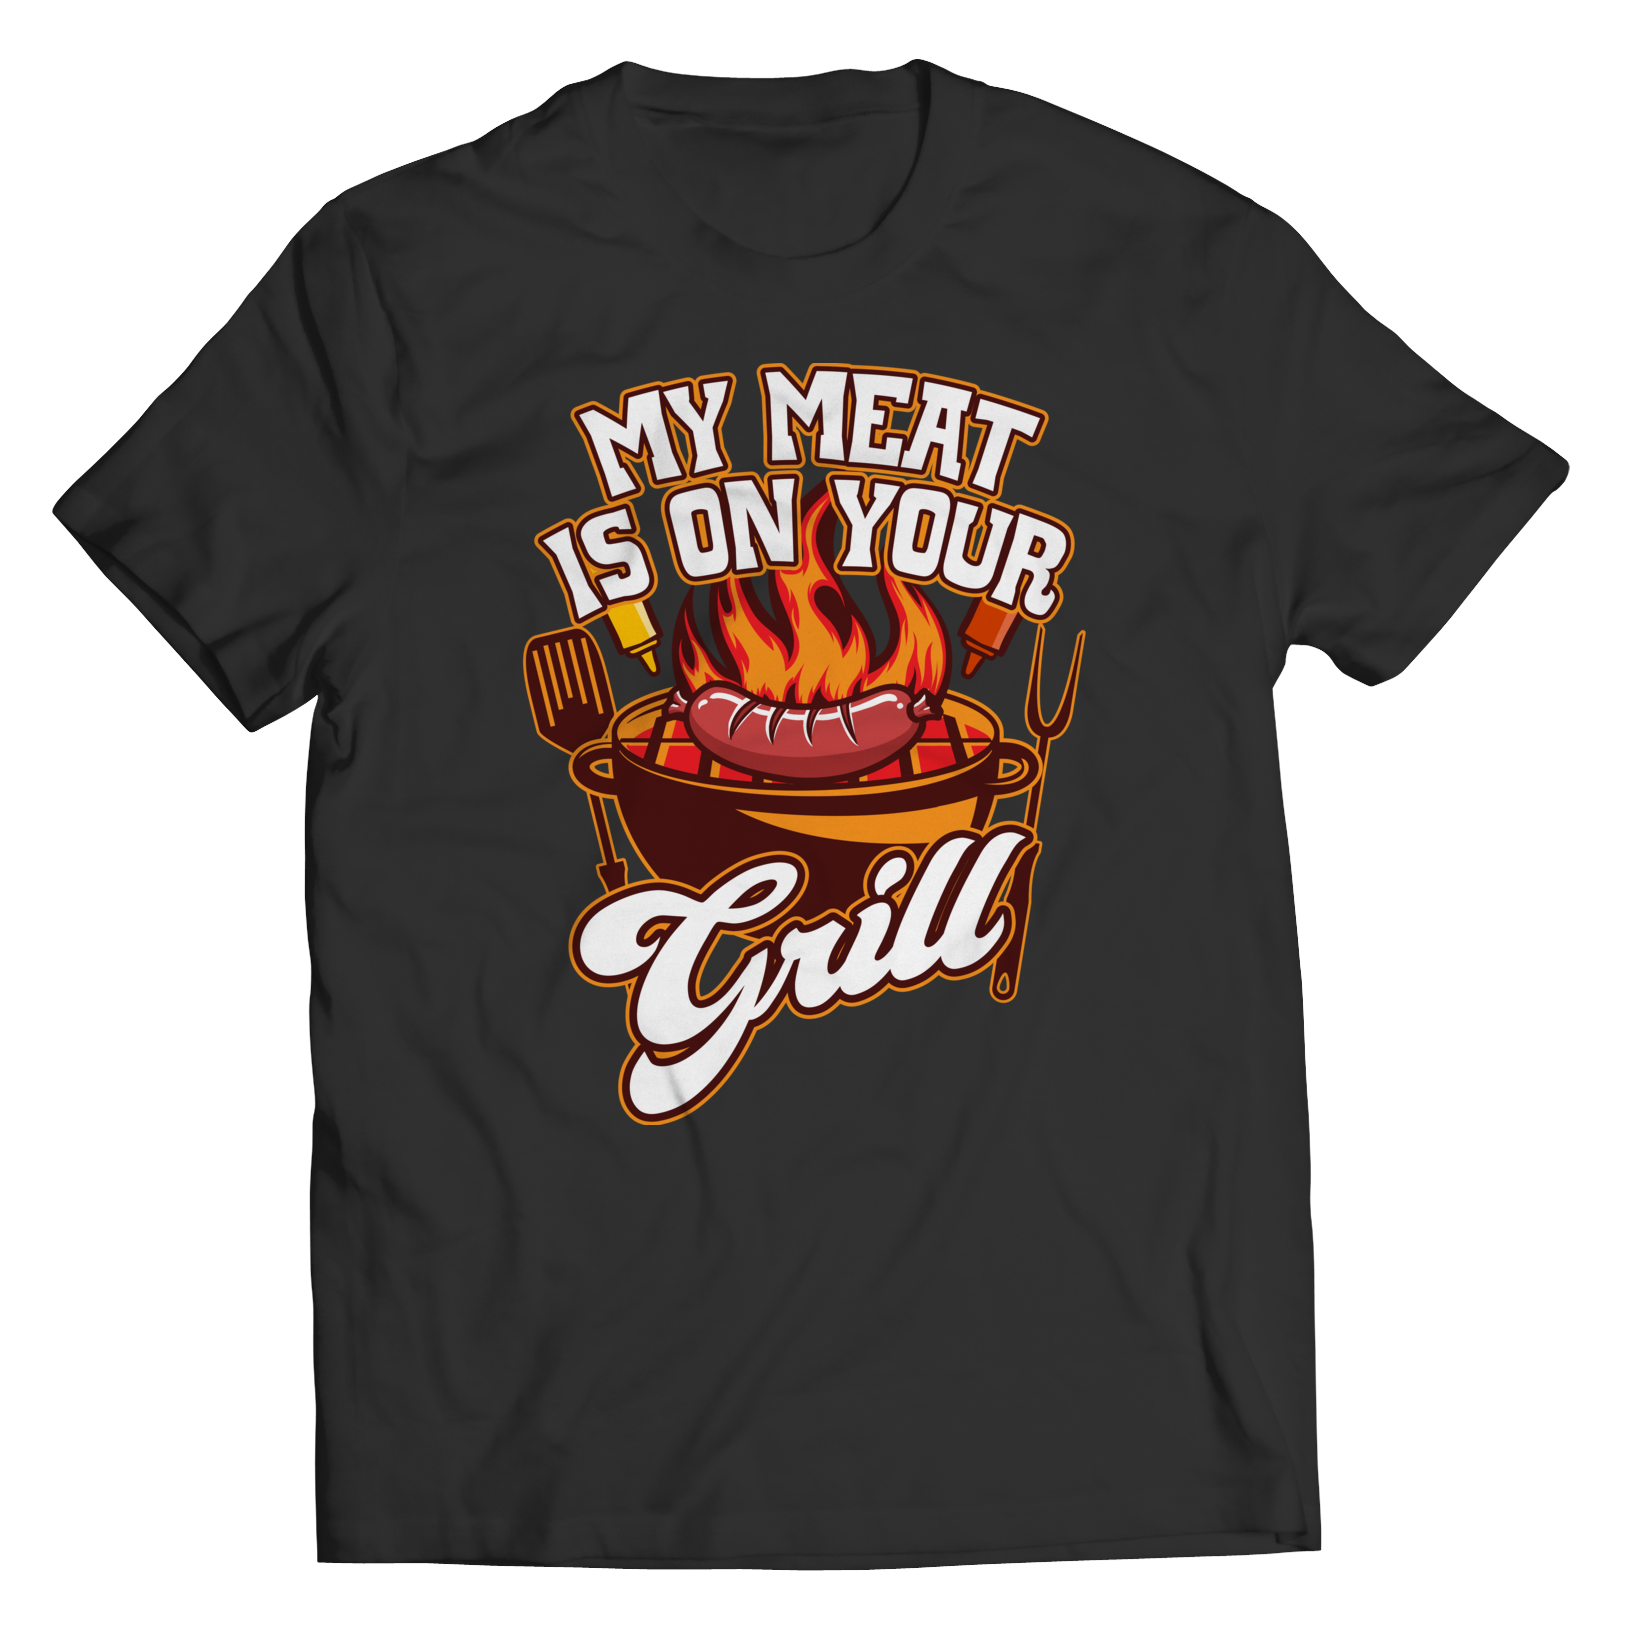 My Meat Is On Your Grill